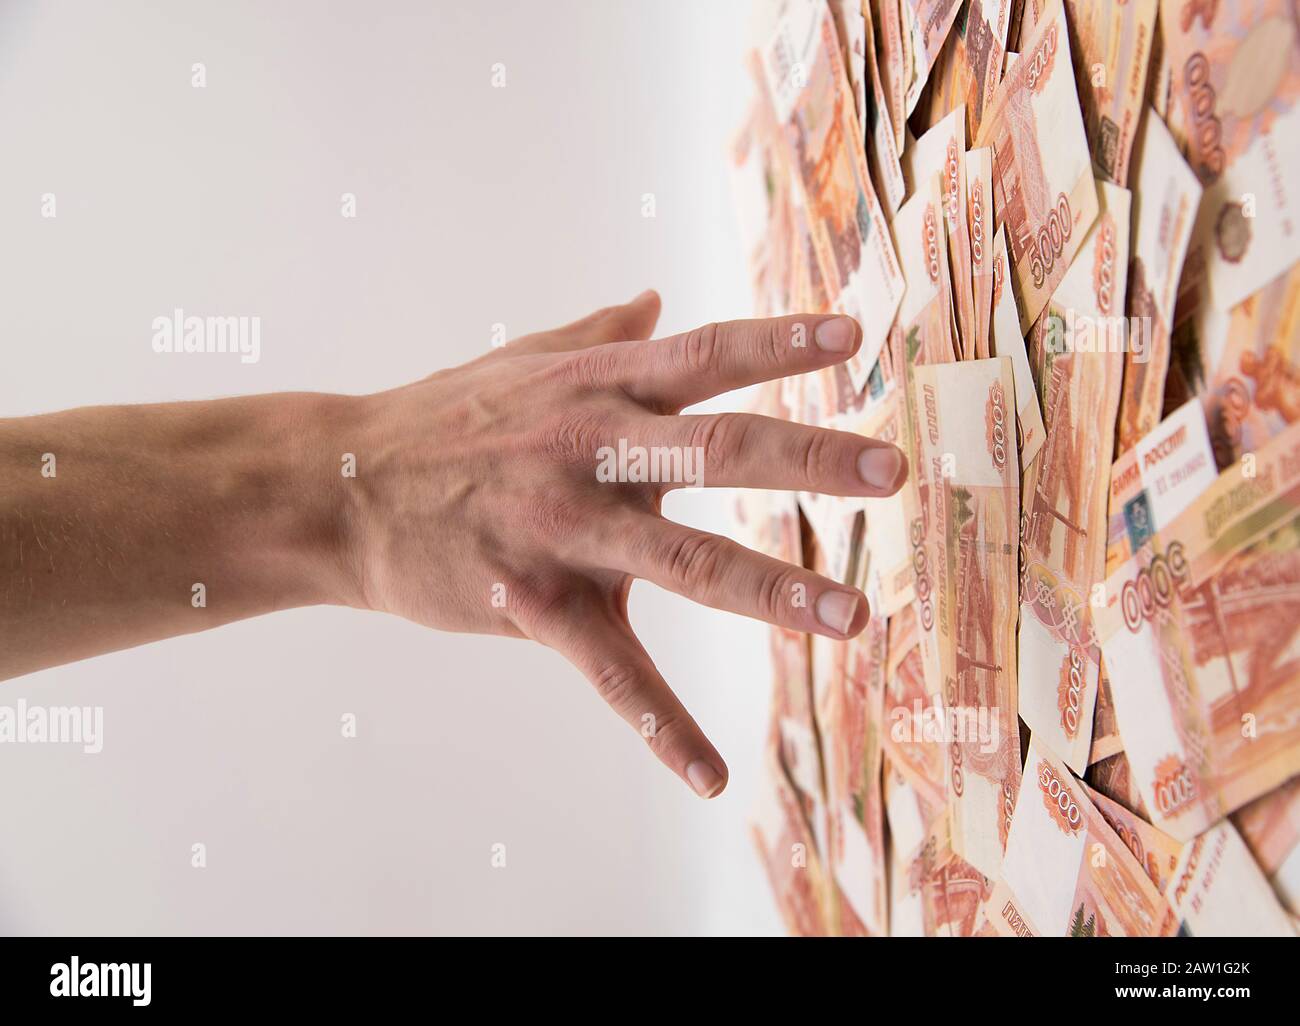 A man's hand reaches for a vertical cash flow of five thousand ruble bills. Stock Photo